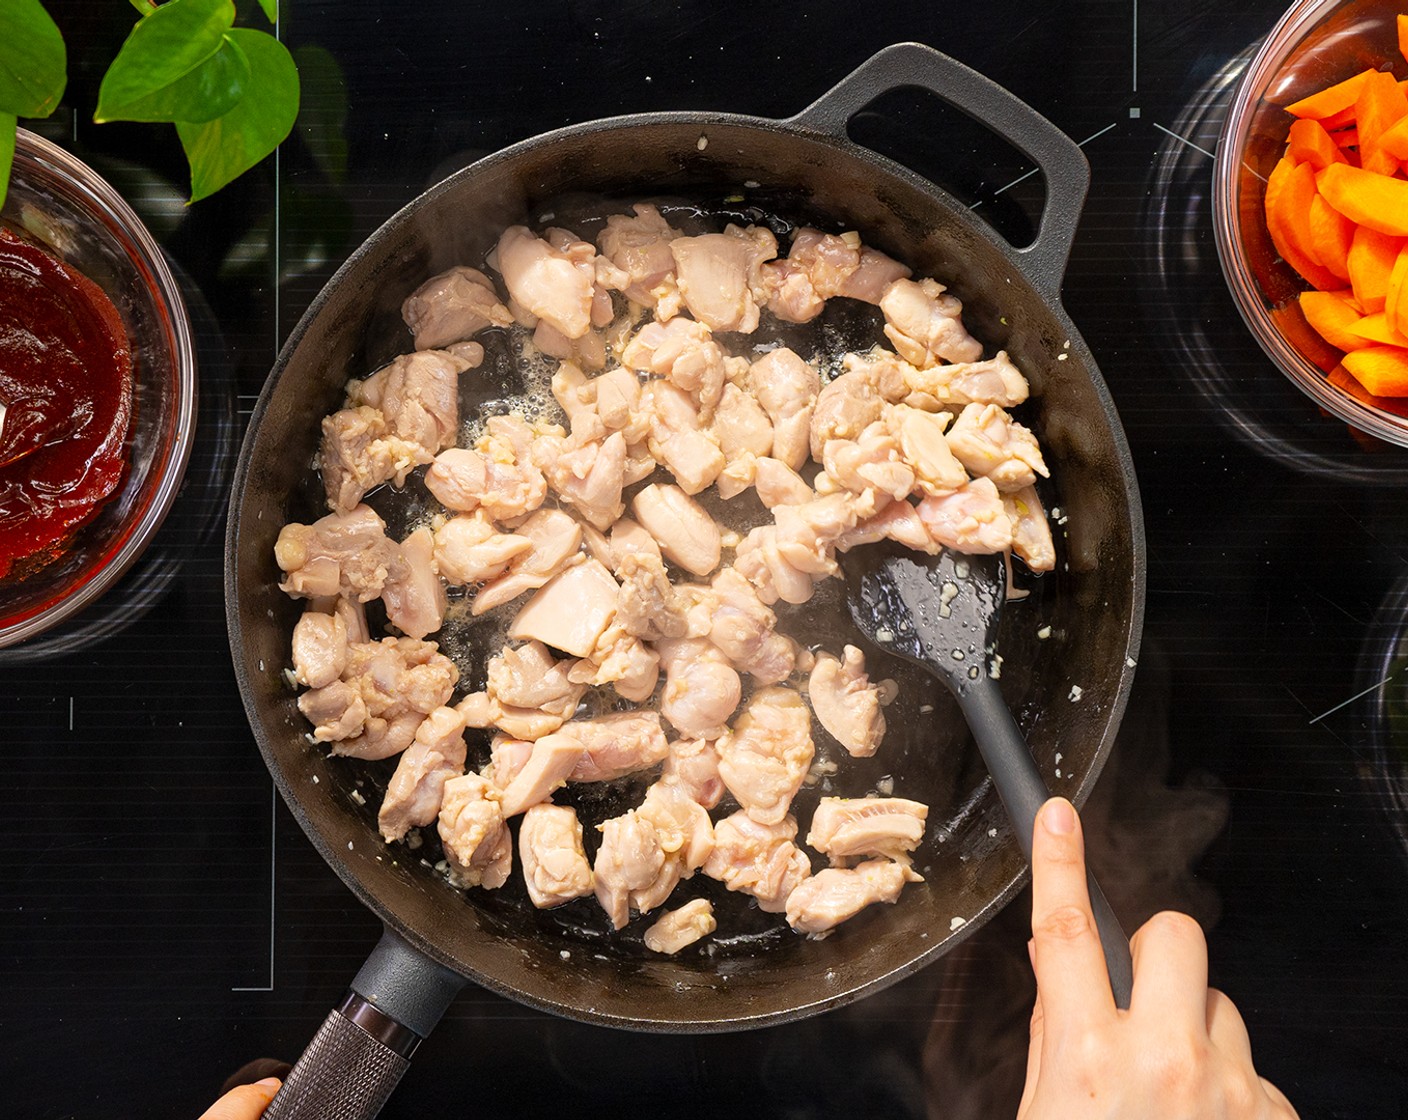 step 4 In a wok or large skillet over medium-high heat, add Vegetable Oil (1/2 Tbsp). Once hot, add Garlic (2 cloves) and cook until fragrant. Then add chicken thighs and cook for 2-3 minutes.